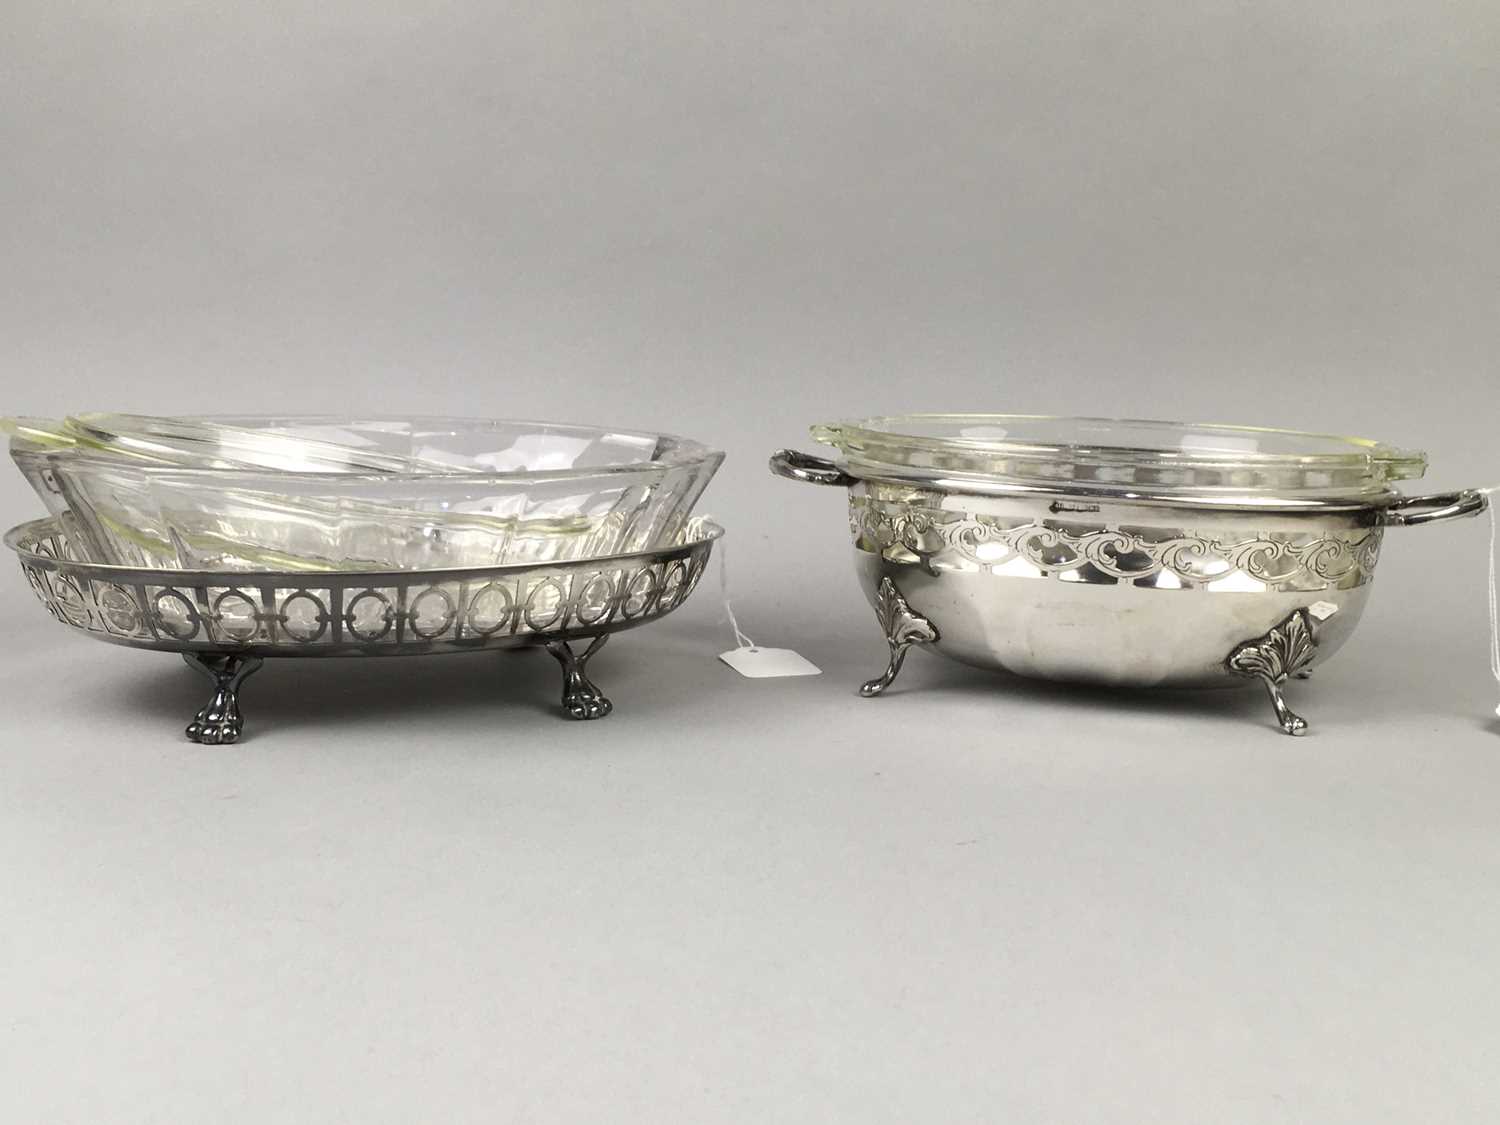 A LOT OF THREE SILVER PLATED SERVING DISHES ALONG WITH A MANTEL CLOCK - Image 2 of 3